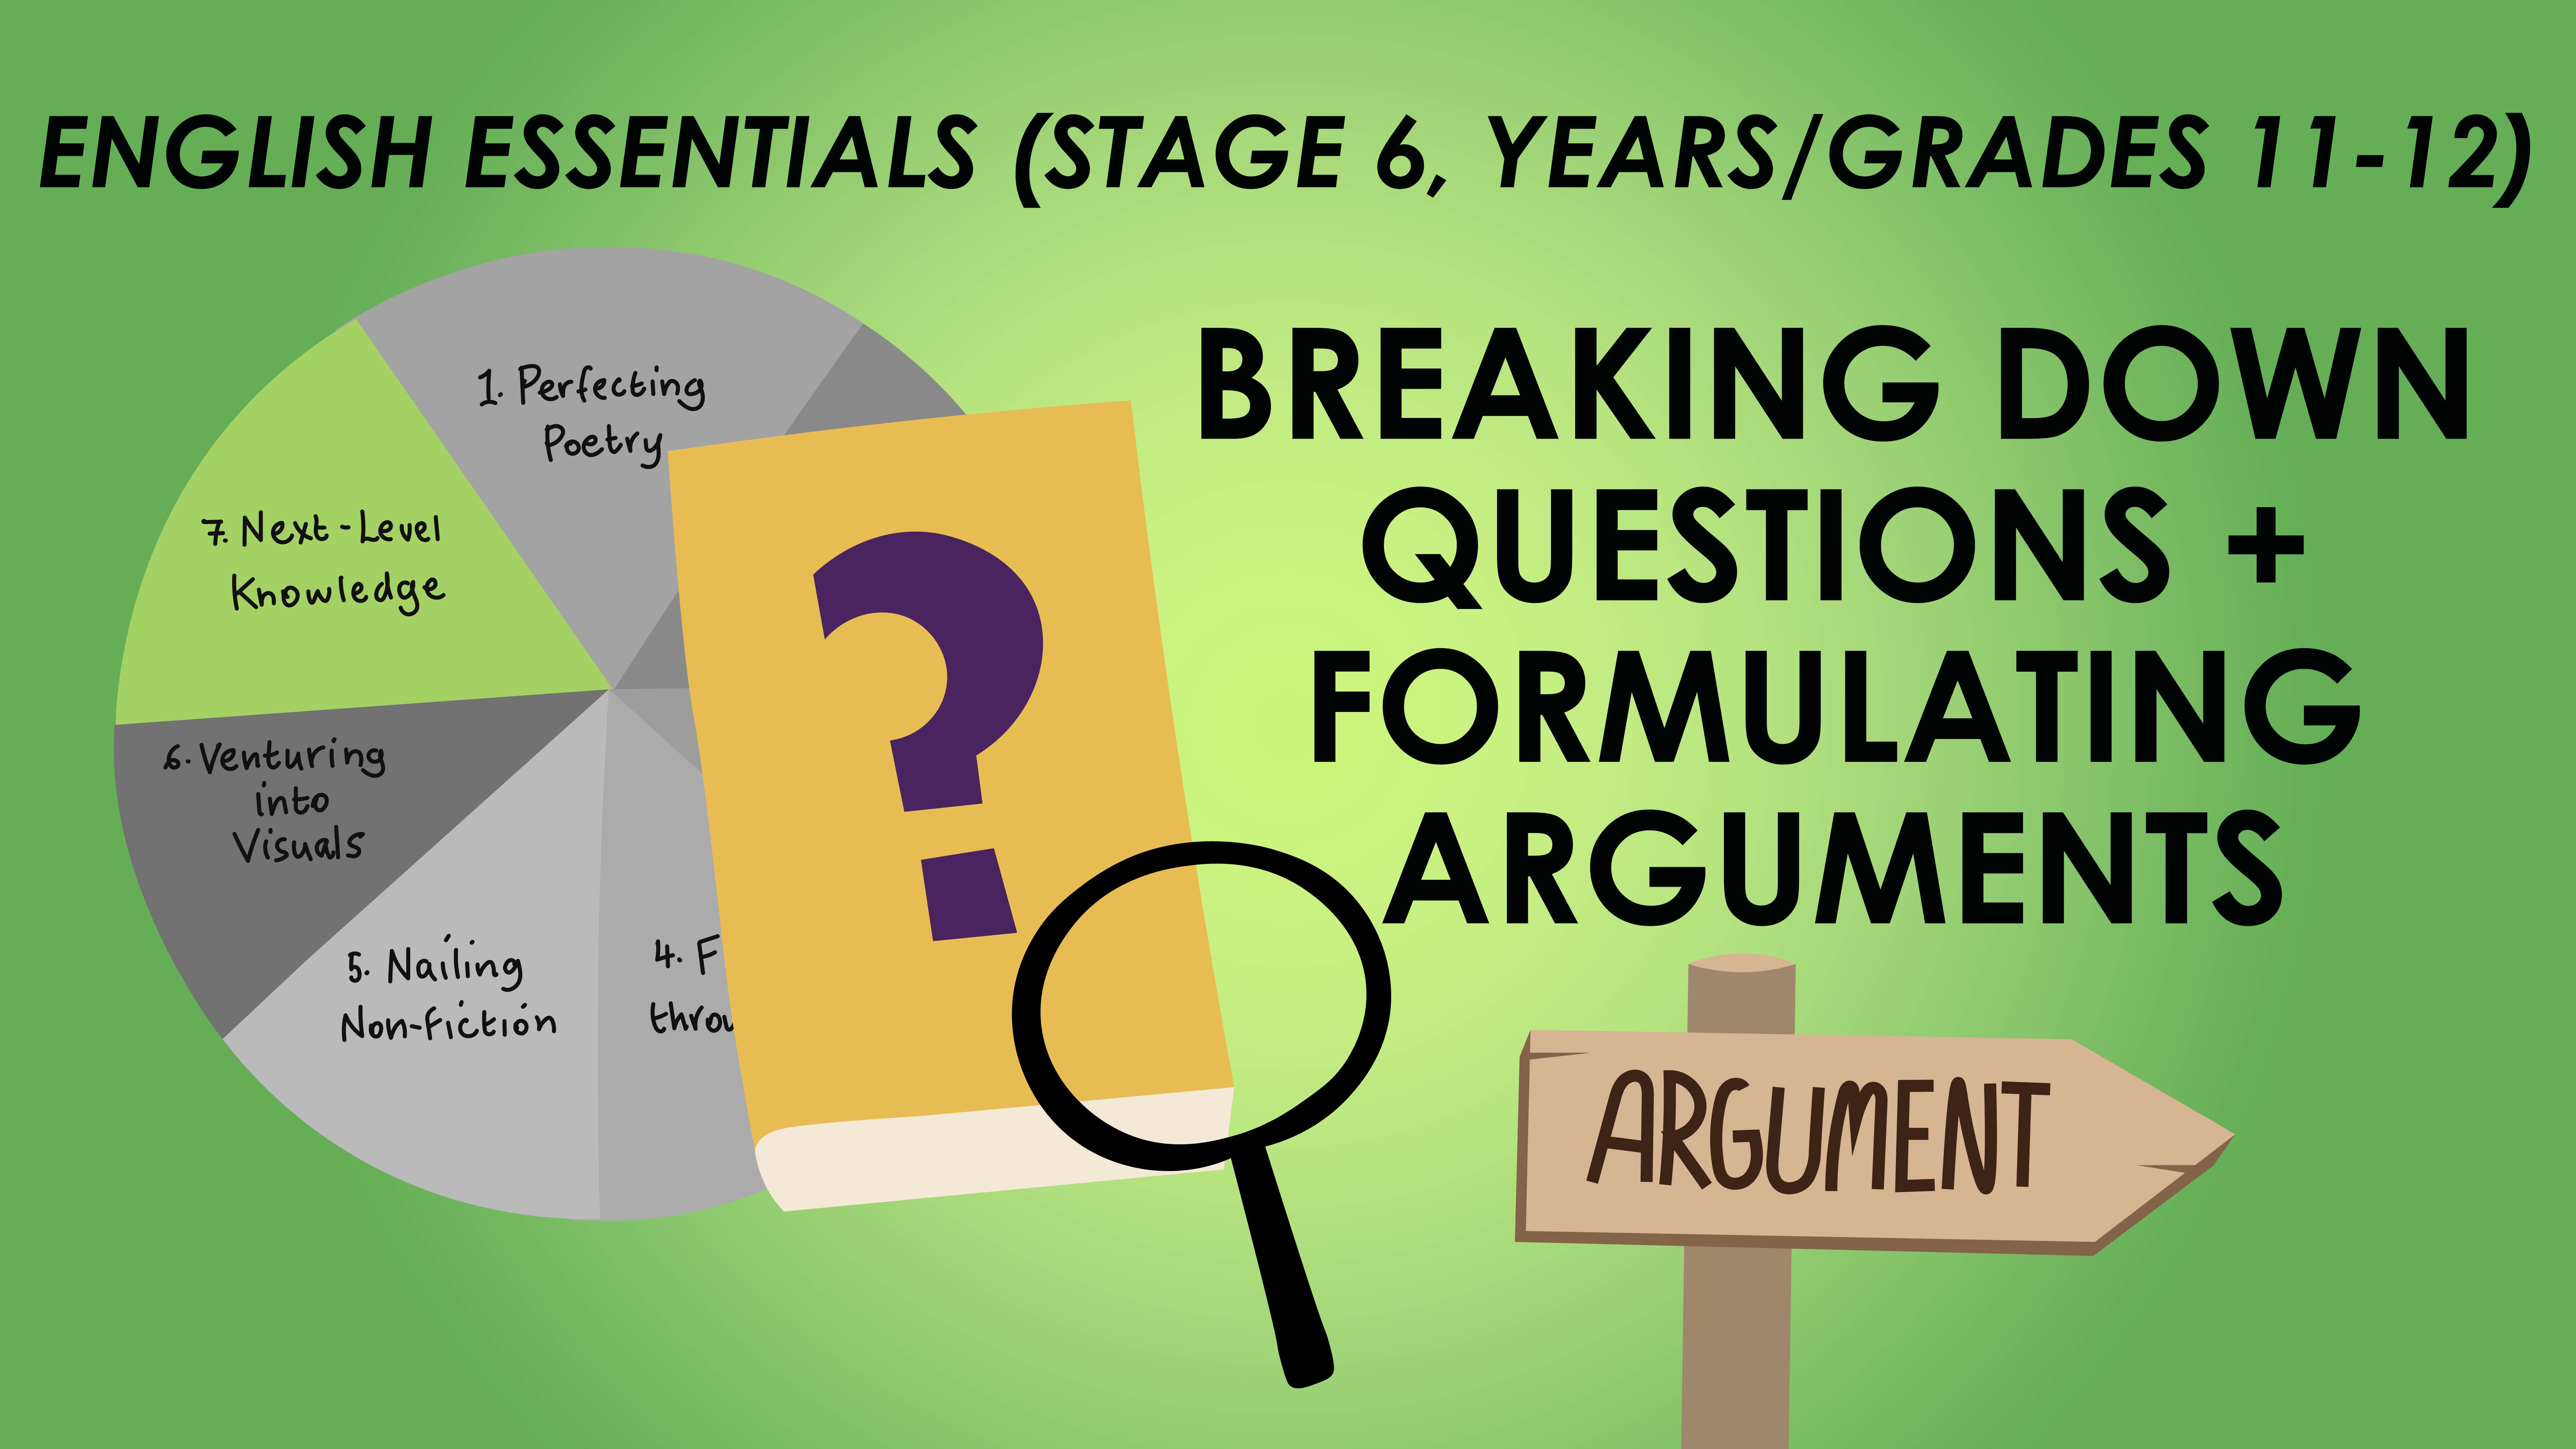 English Essentials - Next Level Knowledge - Breaking Down Questions and Formulating Arguments (Stage 6, Years/Grades 11-12)